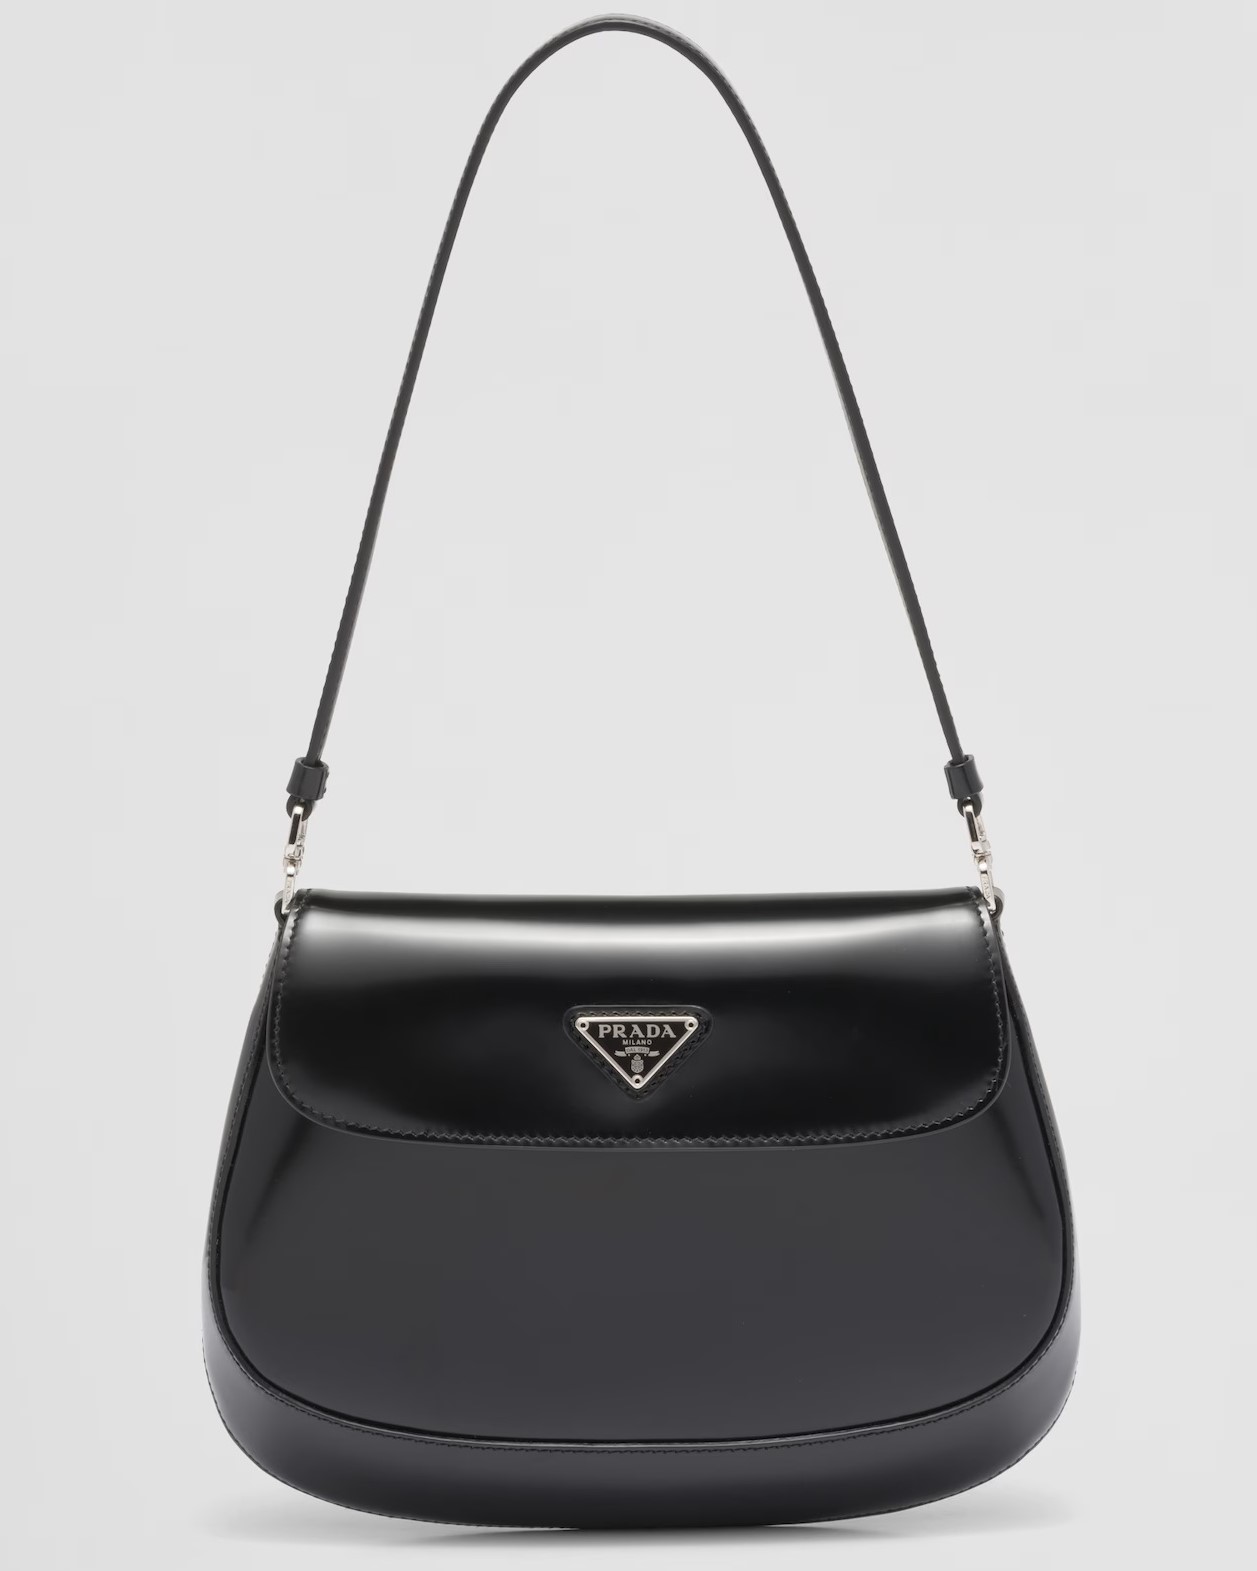 TÚI XÁCH PRADA CLEO BRUSHED LEATHER SHOULDER BAG WITH FLAP 12